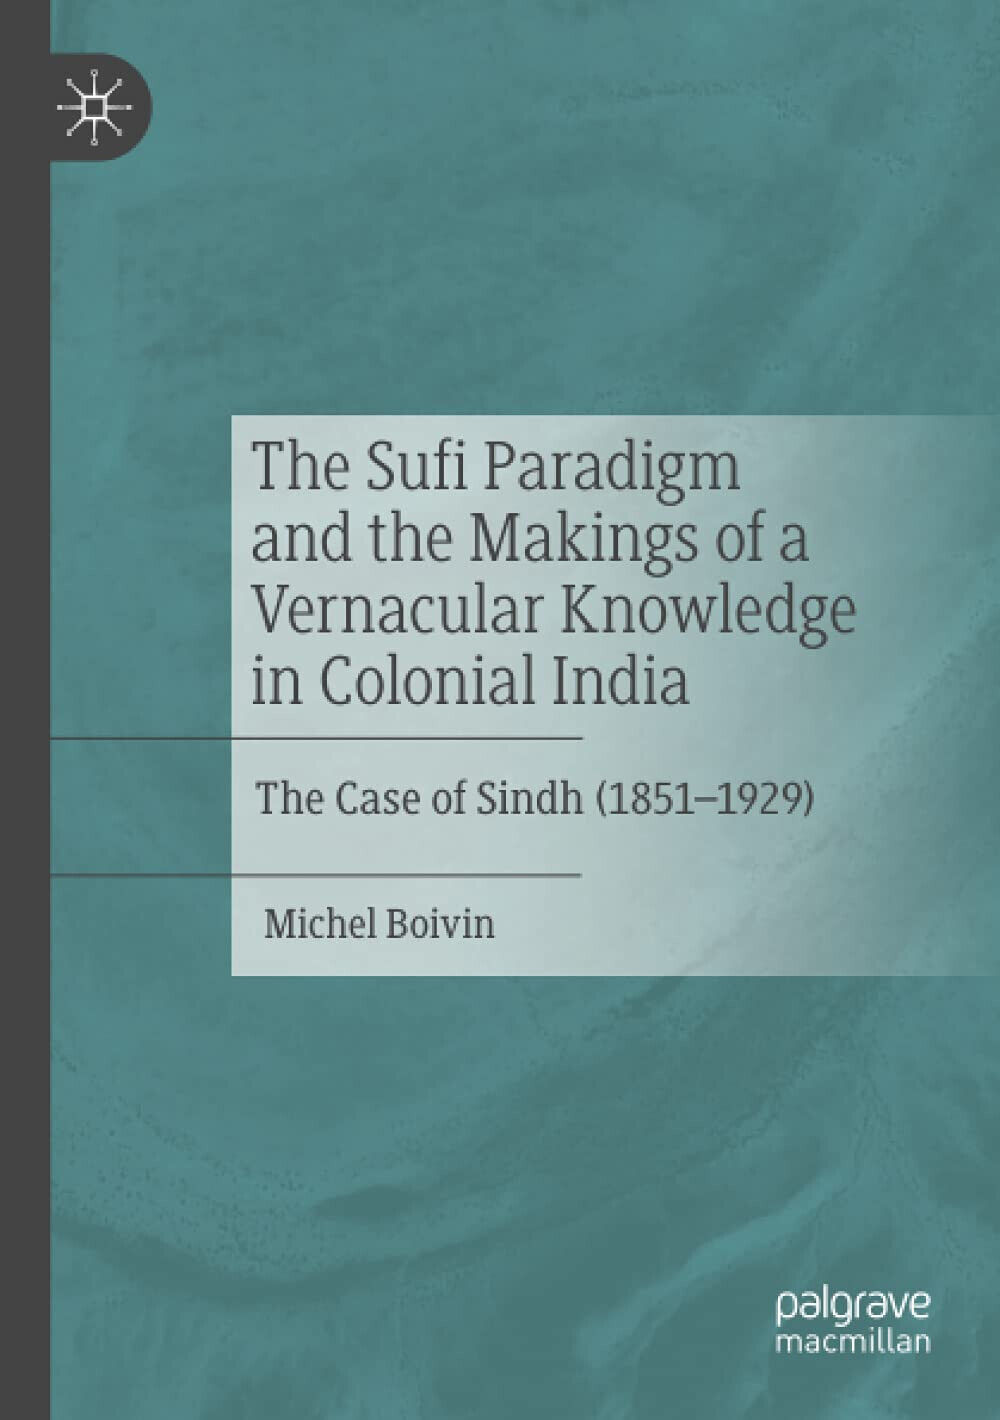 The Sufi Paradigm and the Makings of a Vernacular Knowledge in Colonial India libro usato